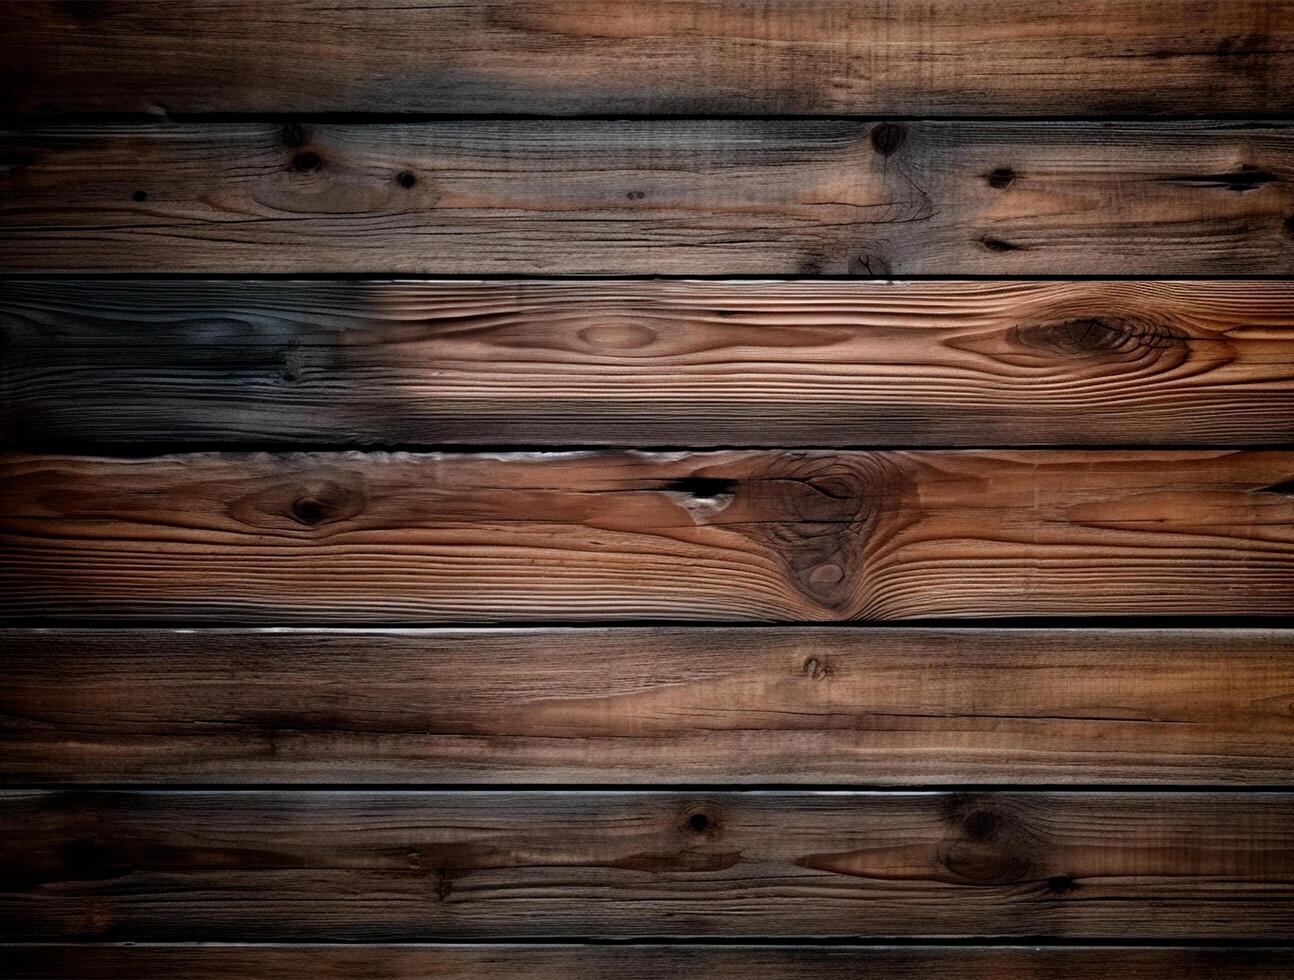 Close-Up Photo of Wooden Texture, Rustic Charm